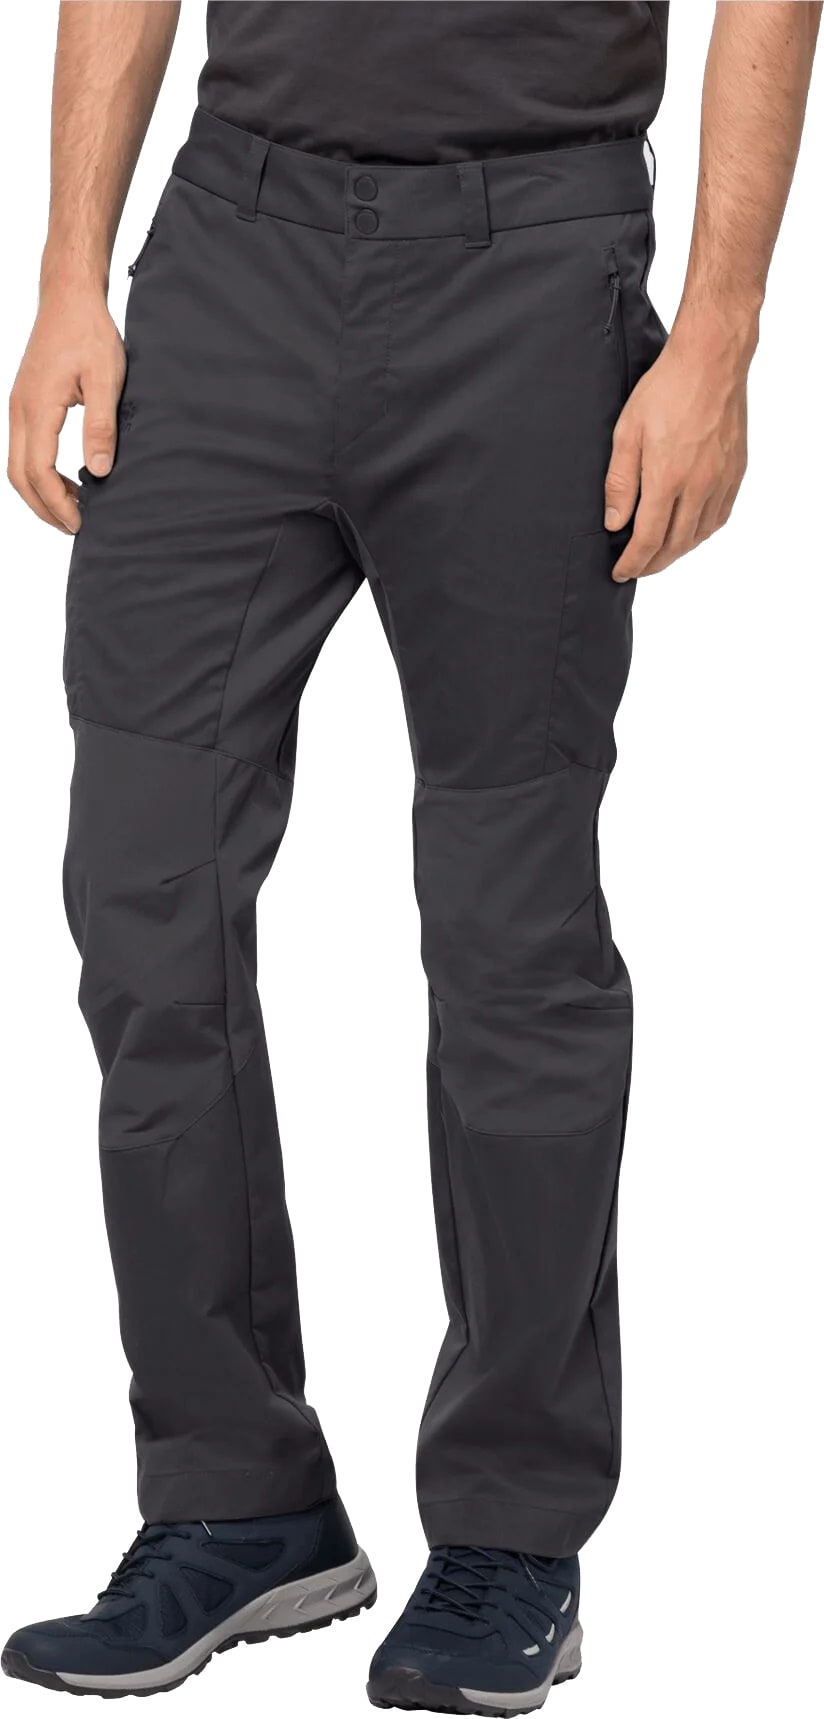 Buy Jack Wolfskin Men's Activate Tour Pant from Outnorth